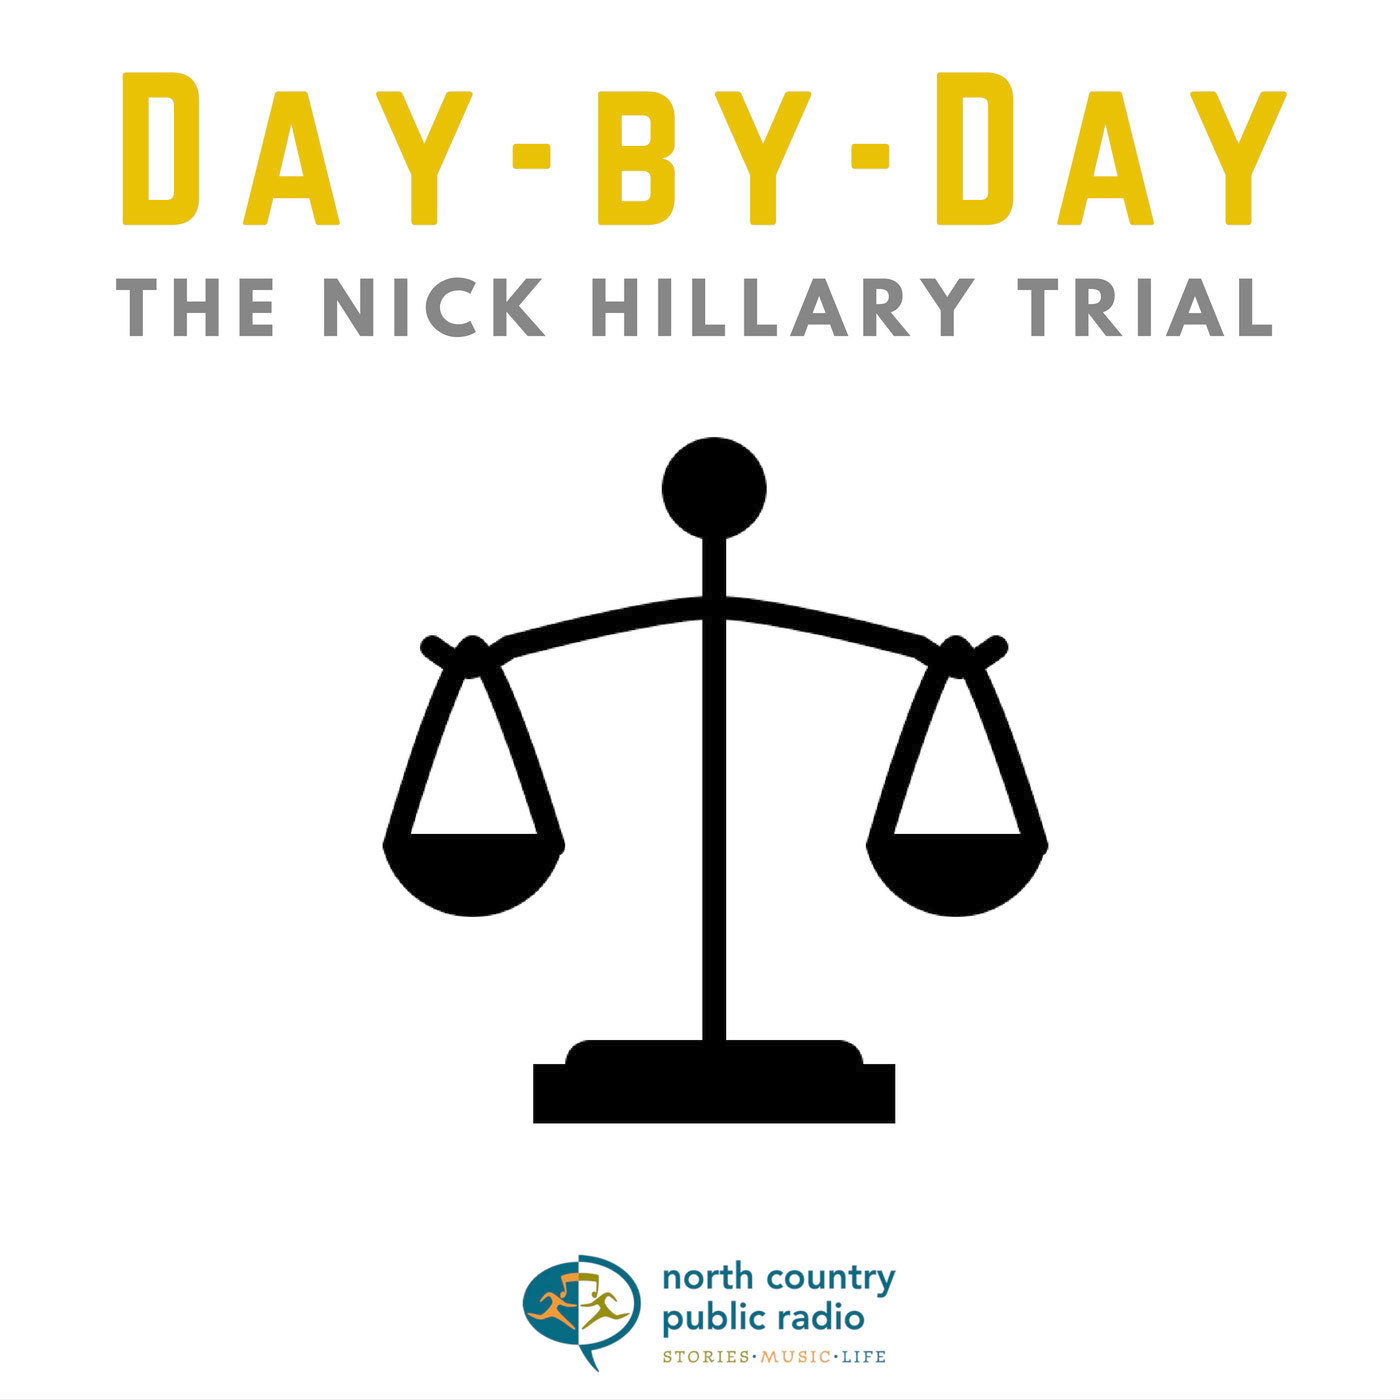 Day-by-Day: The Nick Hillary Trial